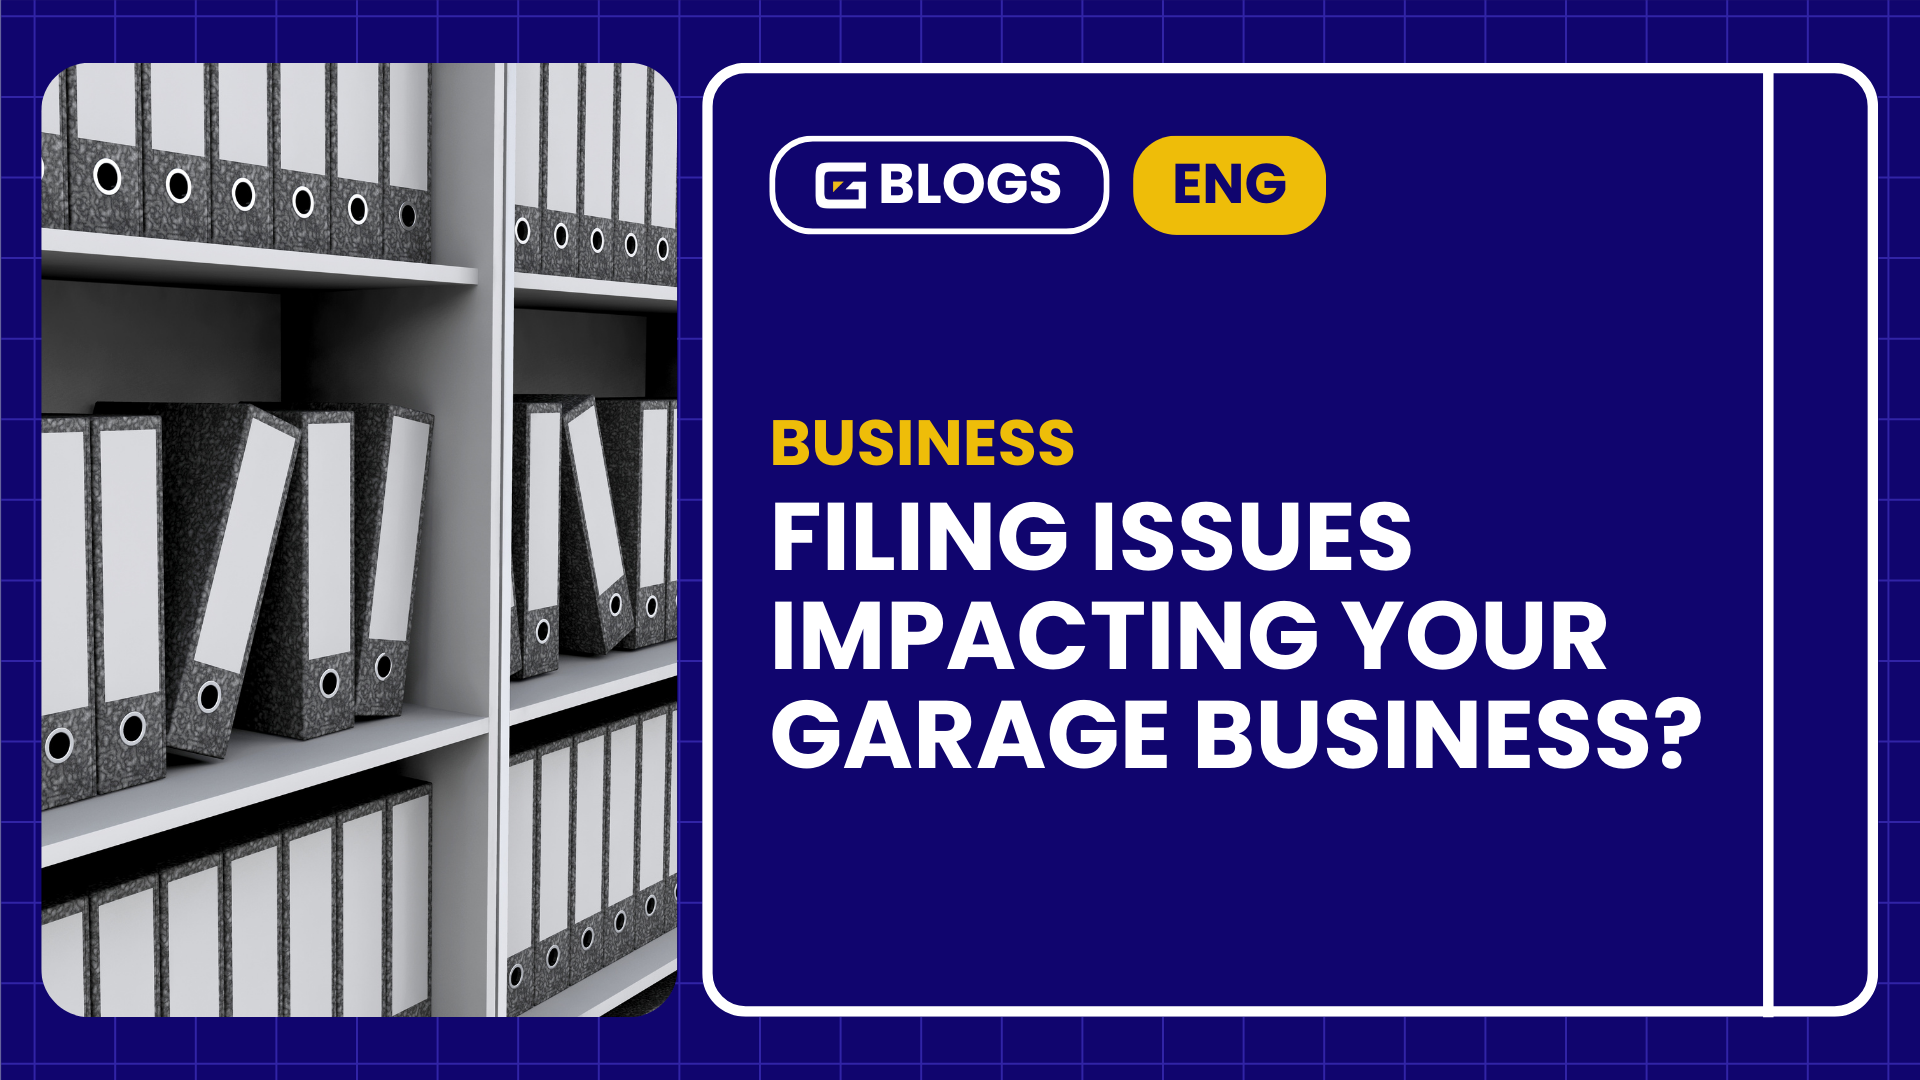 Filing Issues Impacting Your Garage Business?